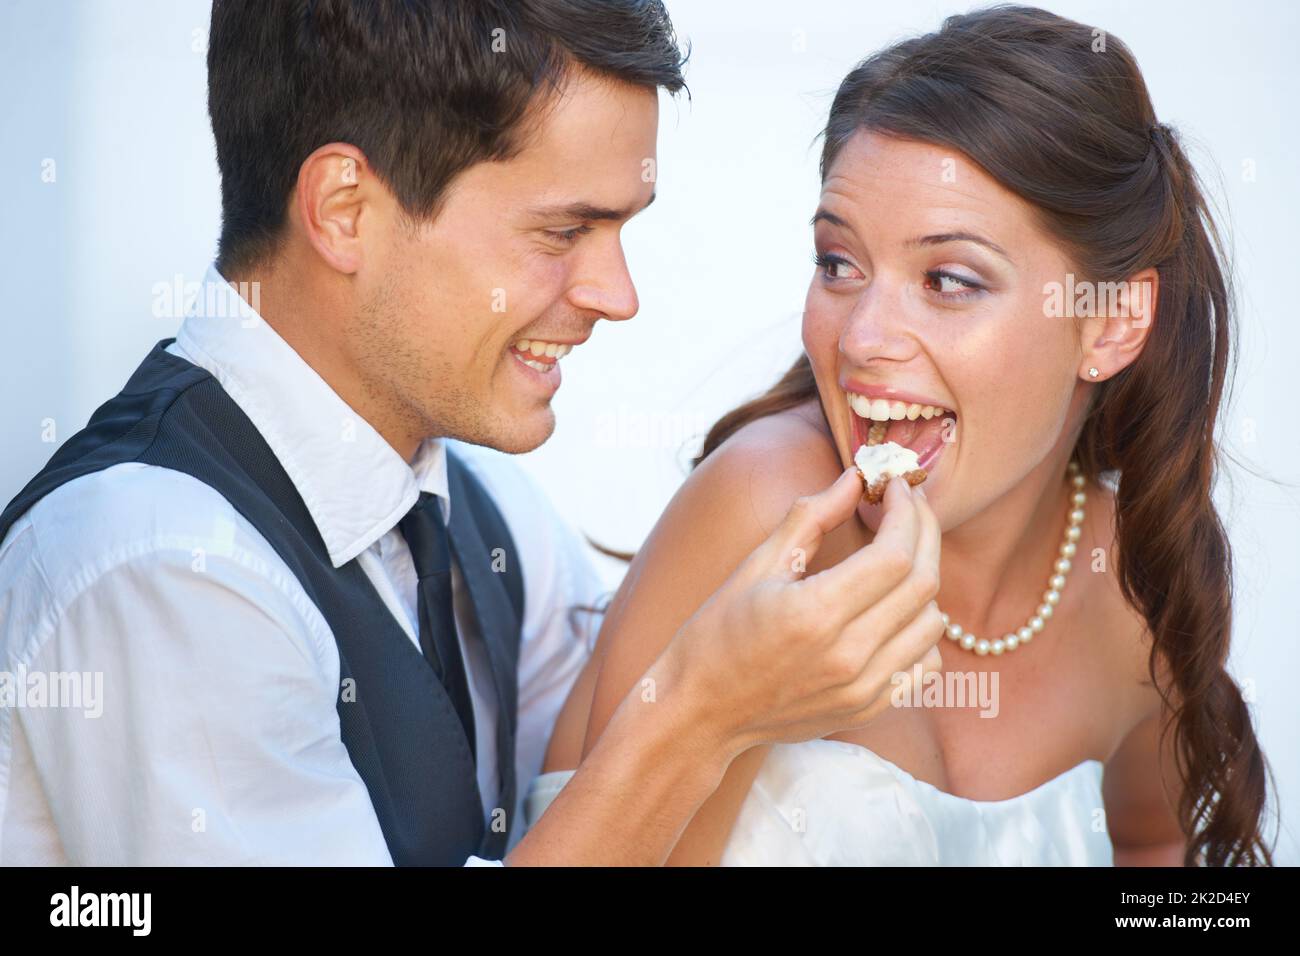 Playful reception moment. Fun shot of a young groom feeding his bride wedding cake. Stock Photo